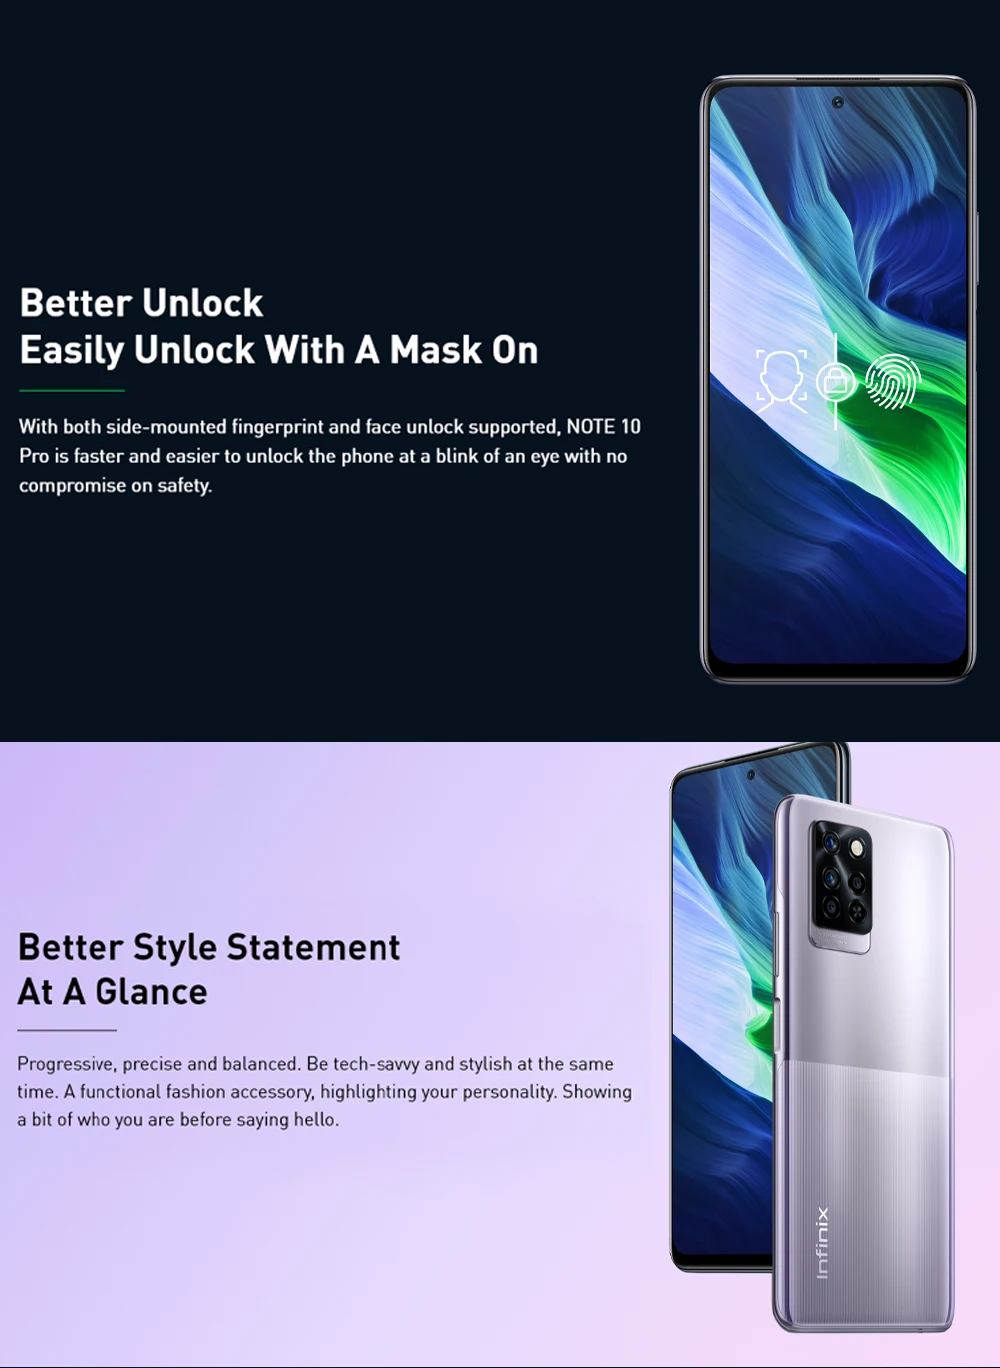 Global Version Infinix NOTE 10 PRO NFC Support 6.95'' Display Smartphone Helio G95 64MP Camera 33W Super Charge 5000 Battery infinix new